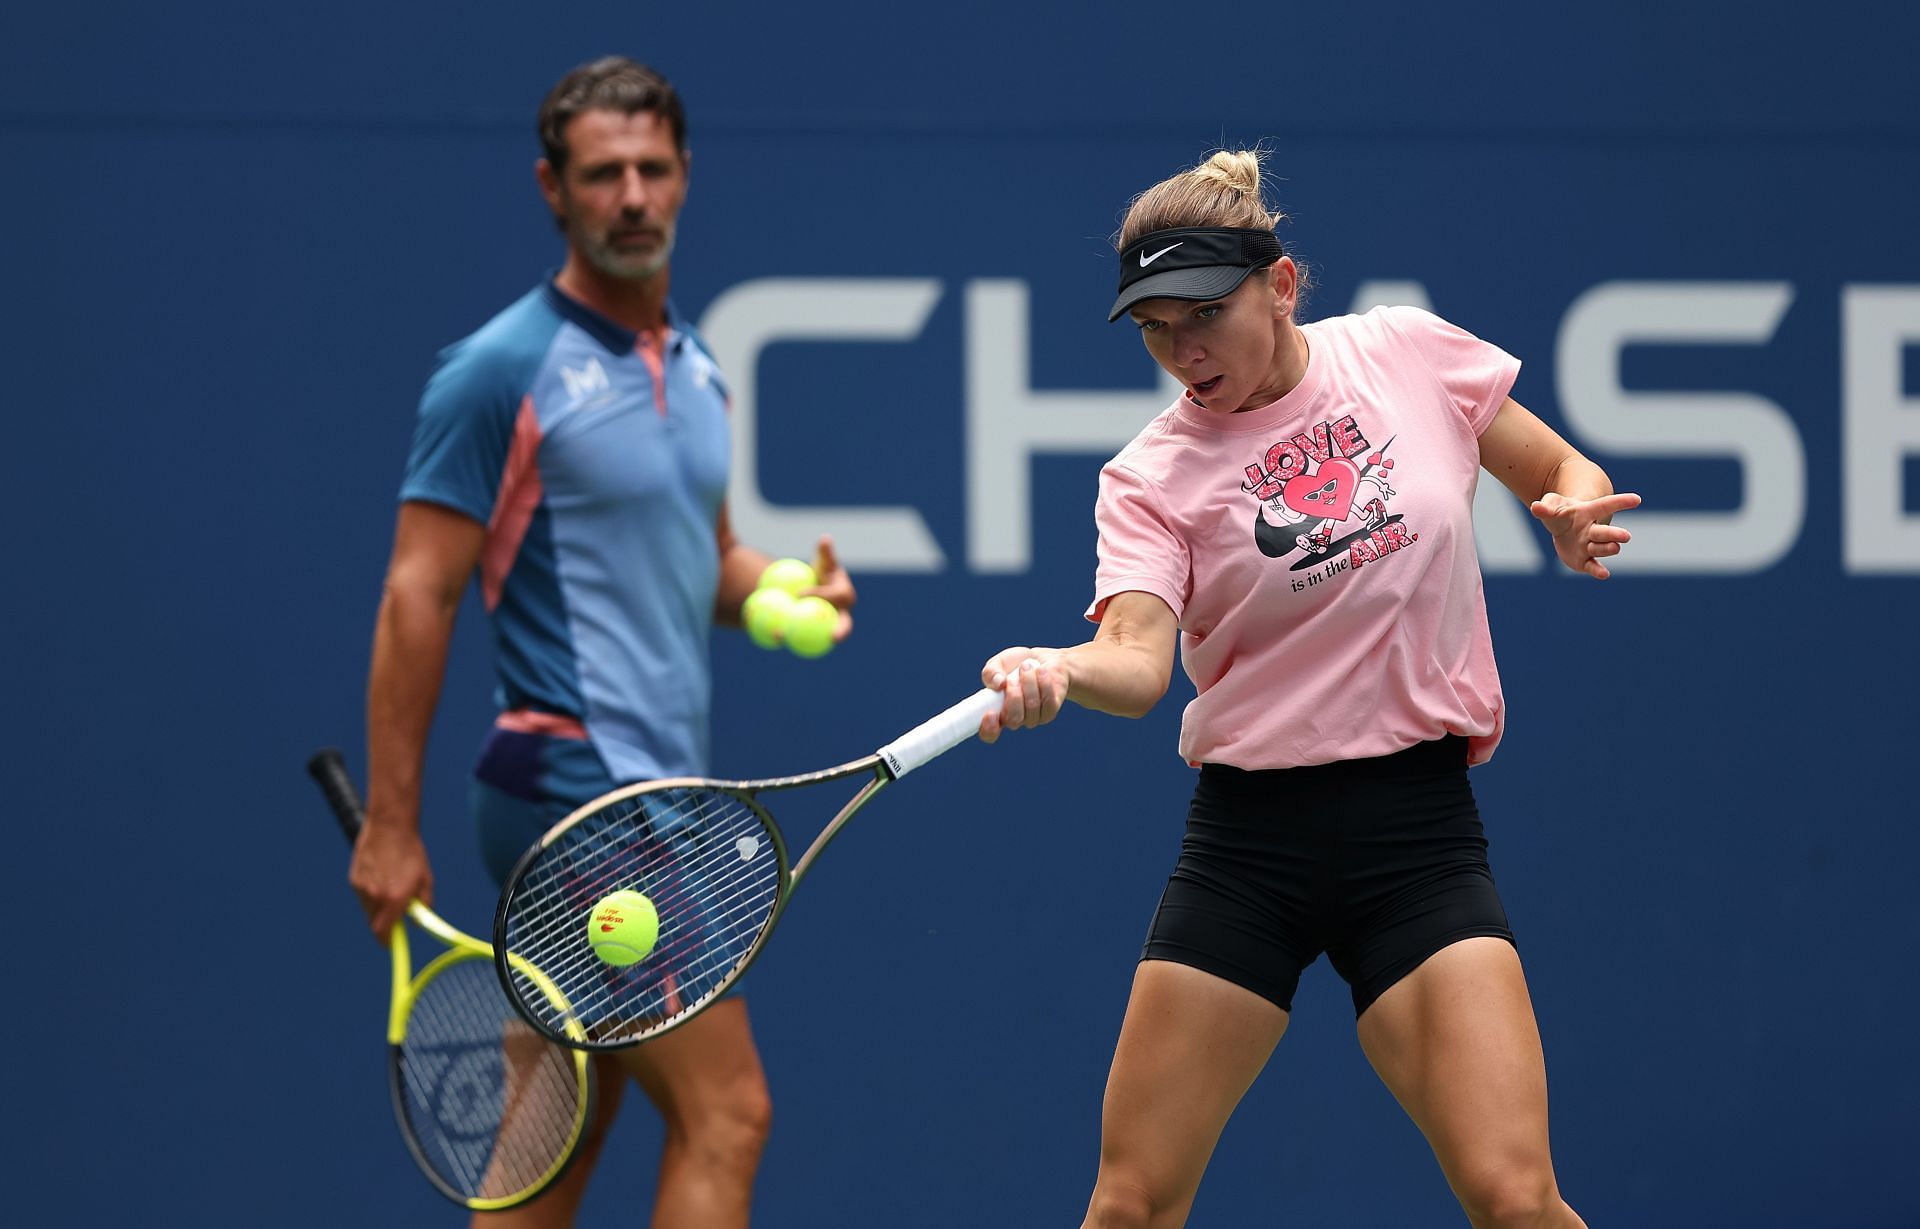 Simona Halep (right) practices for the 2022 US Open as coach Patrick Mouratoglou looks on.